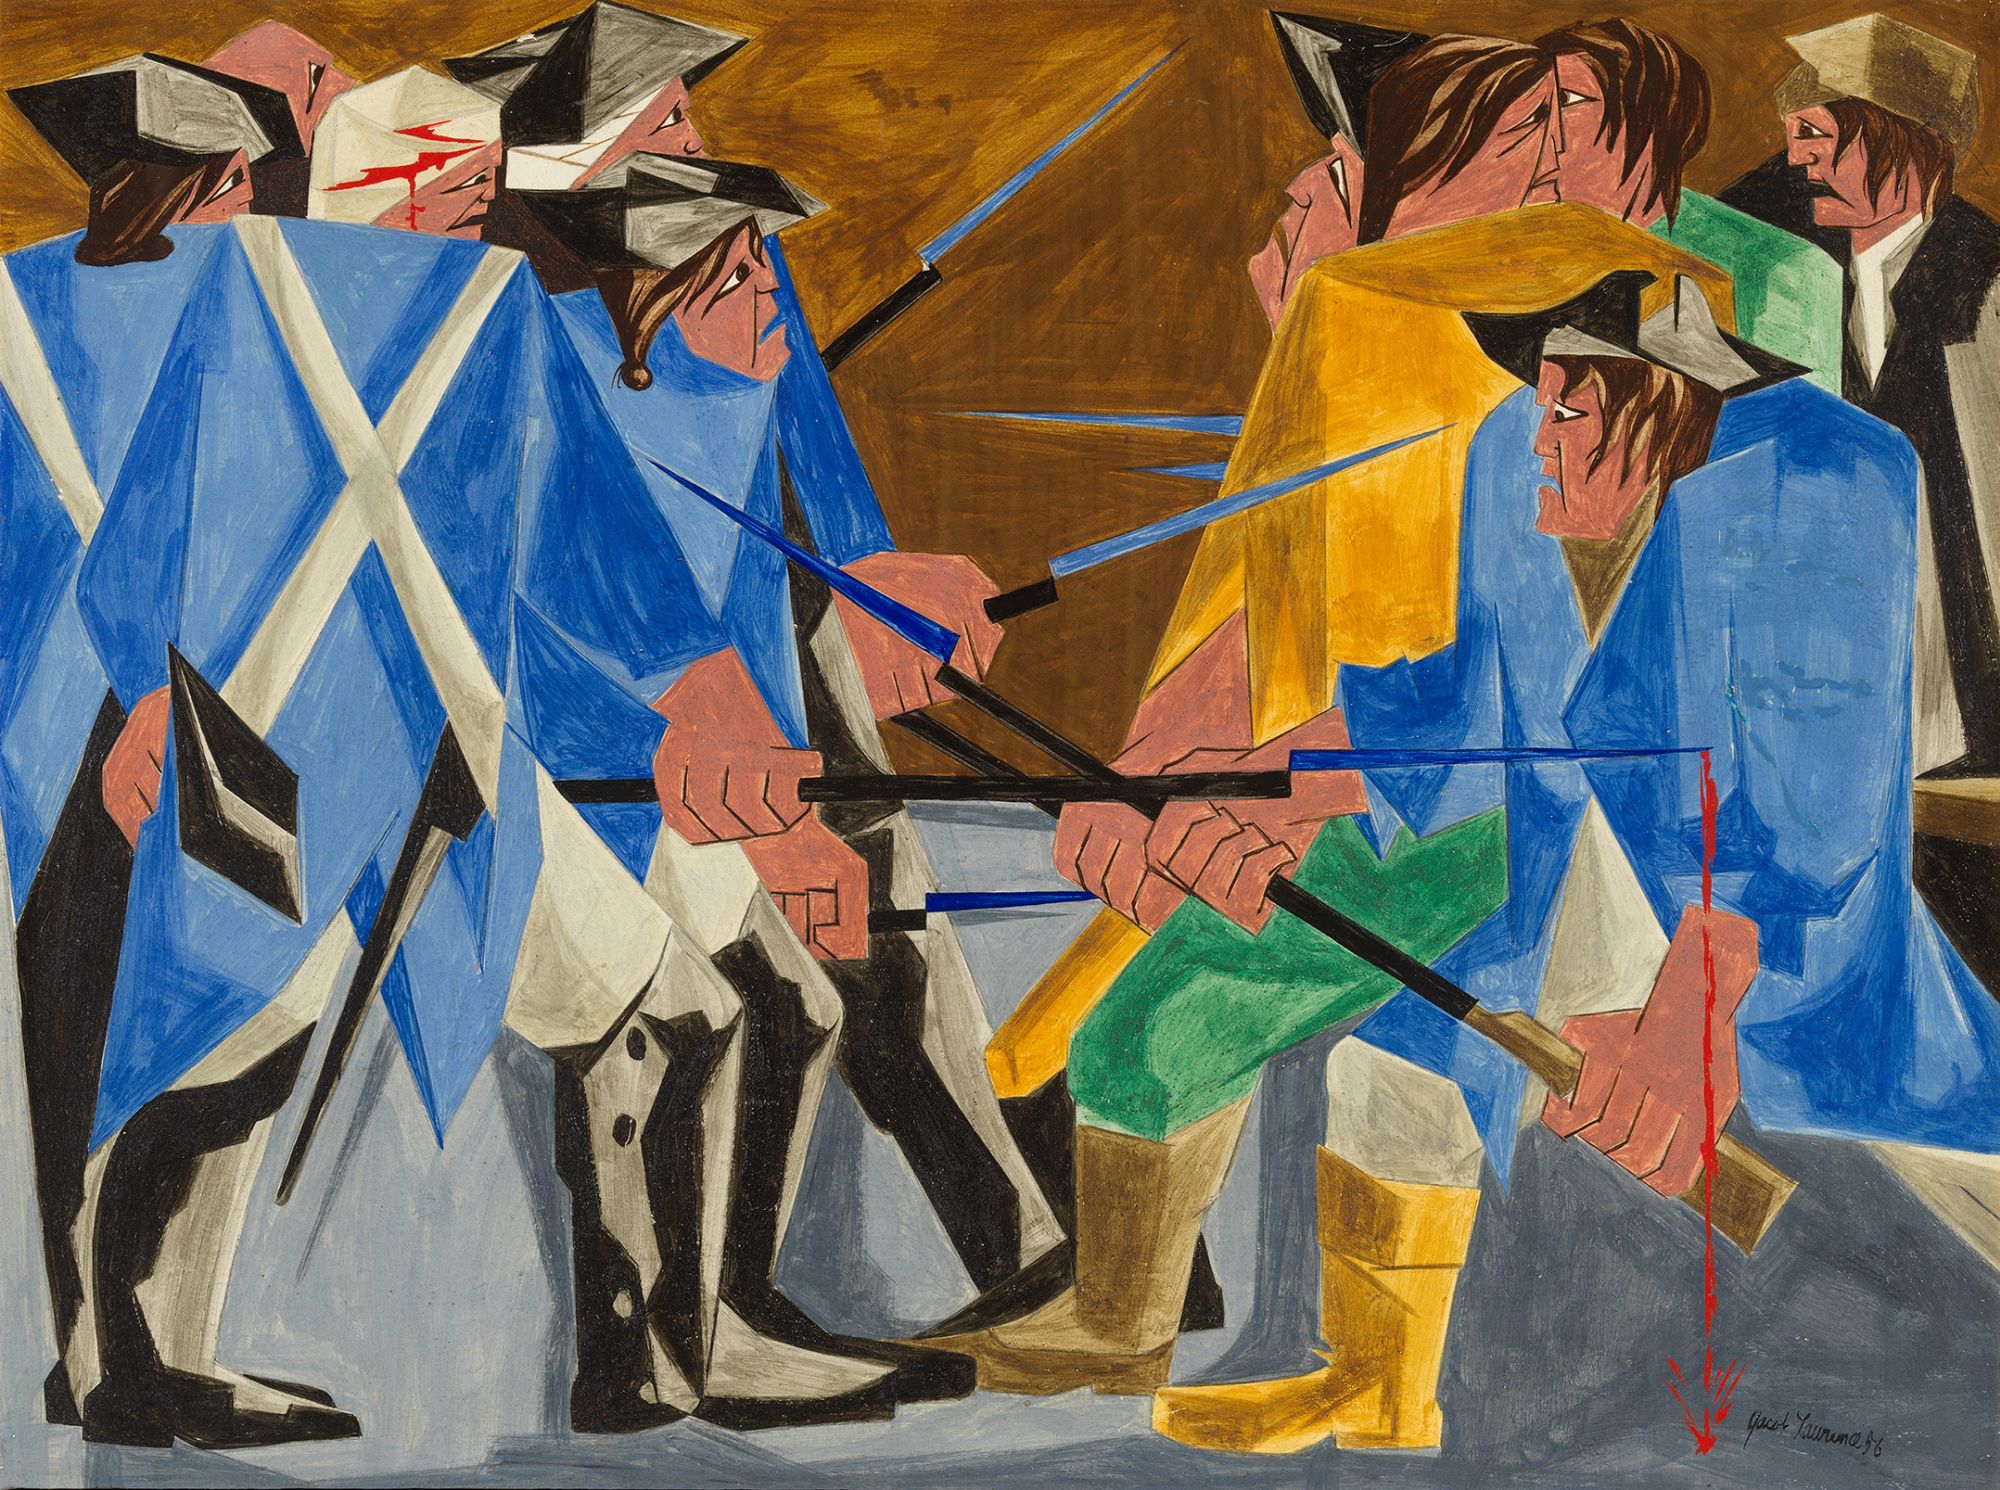 01 Jacob Lawrence Met Museum lost painting RESTRICTED